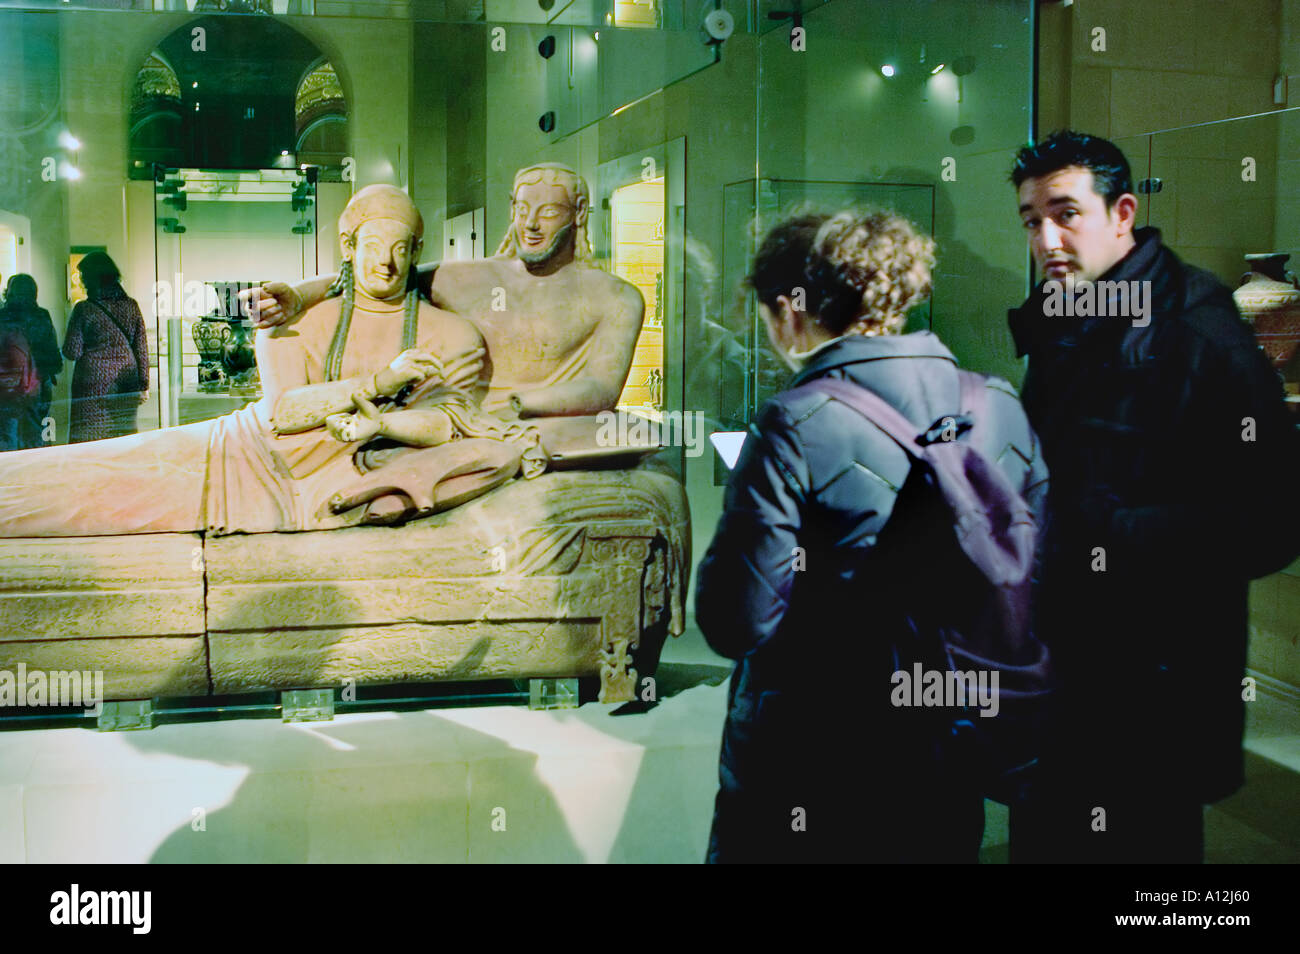 Paris France Couple Visiting in Louvre Museum, 'The Etruscan Sarcophagus of a Married Couple' Sculpture, Statues Stock Photo